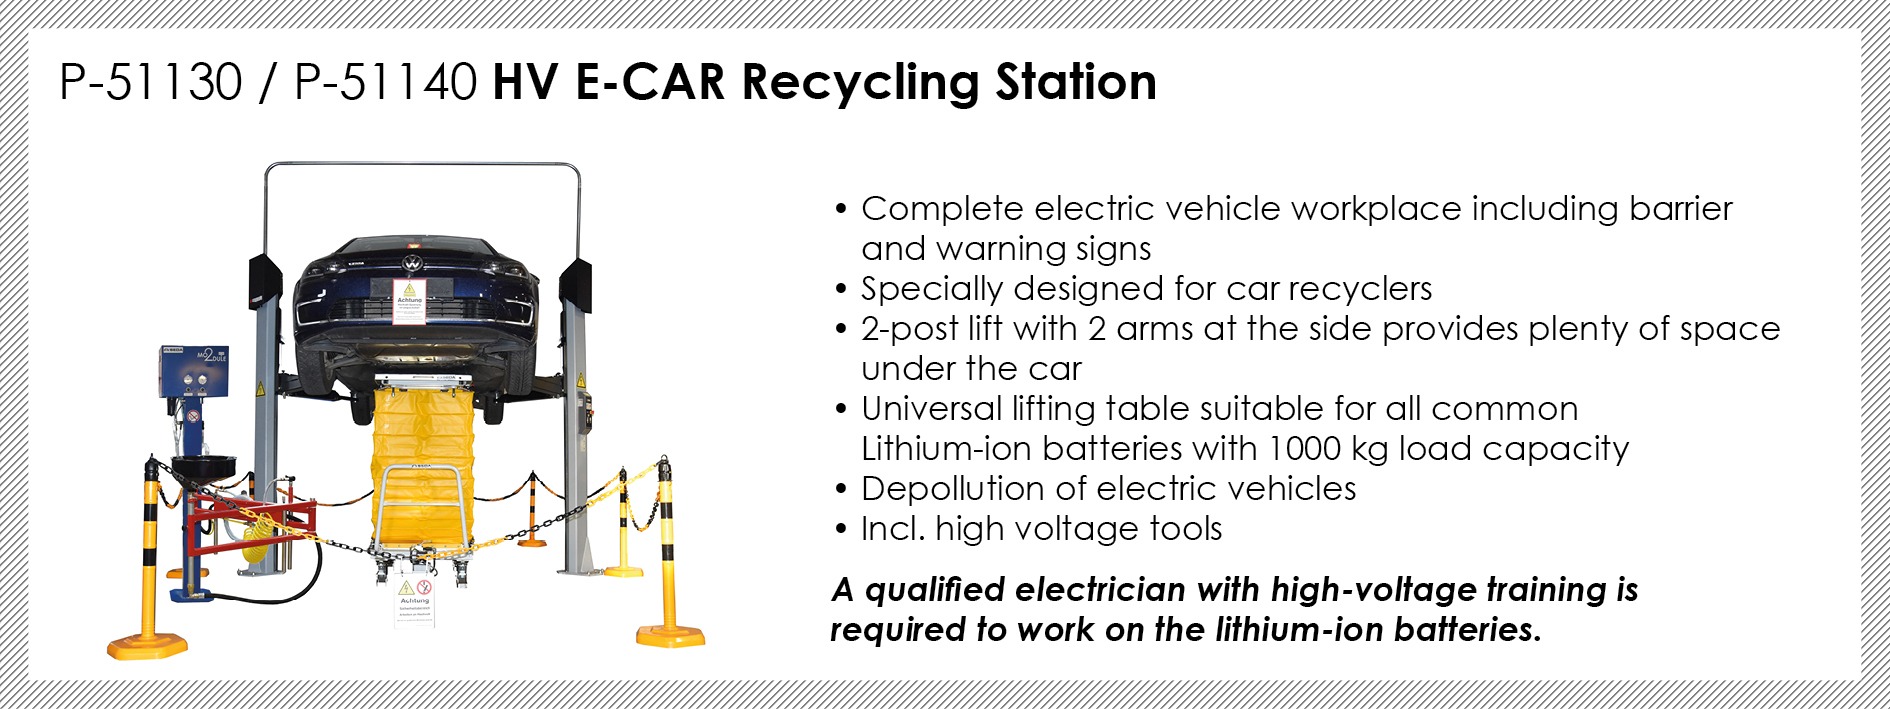 VER MAIL EN HV E car Recycling Station - E-Car Recycling – When does it really start?